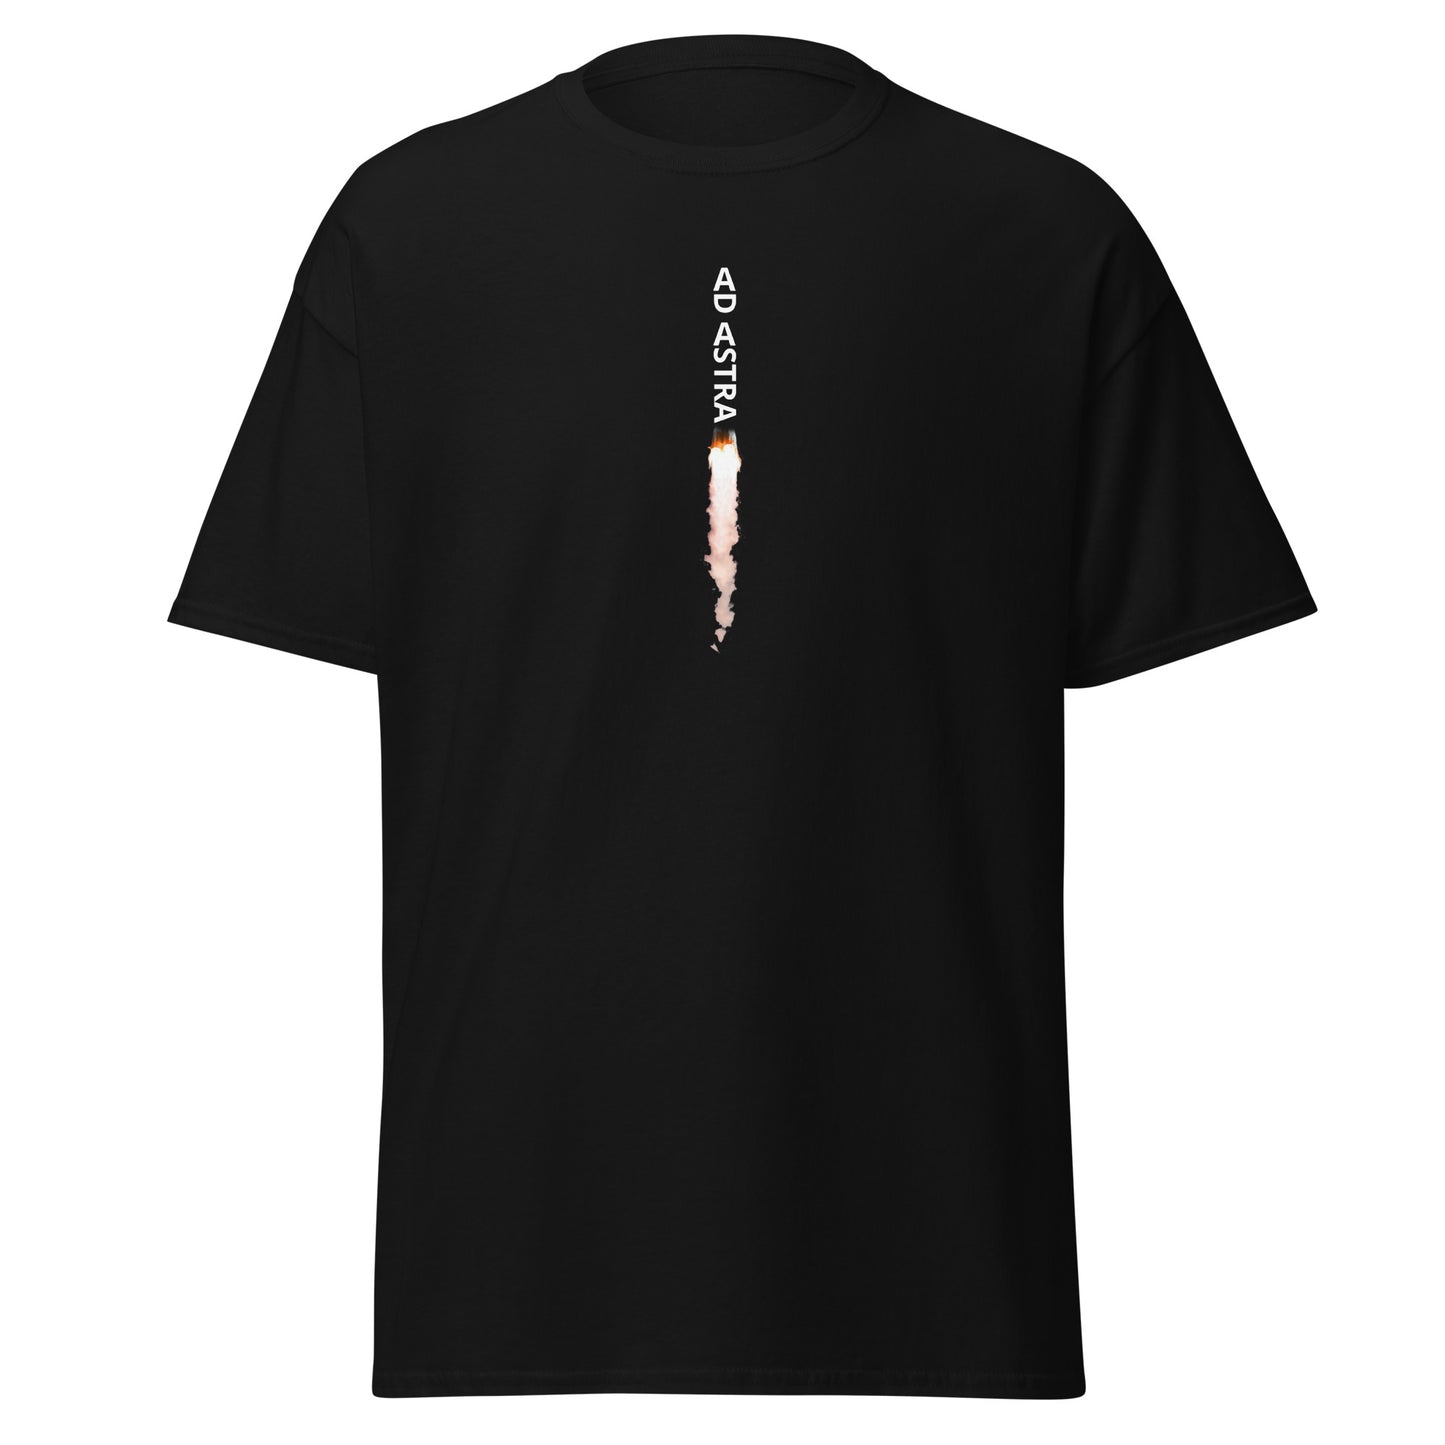 Men's classic tee - Ad Astra w/ rocket engine flame